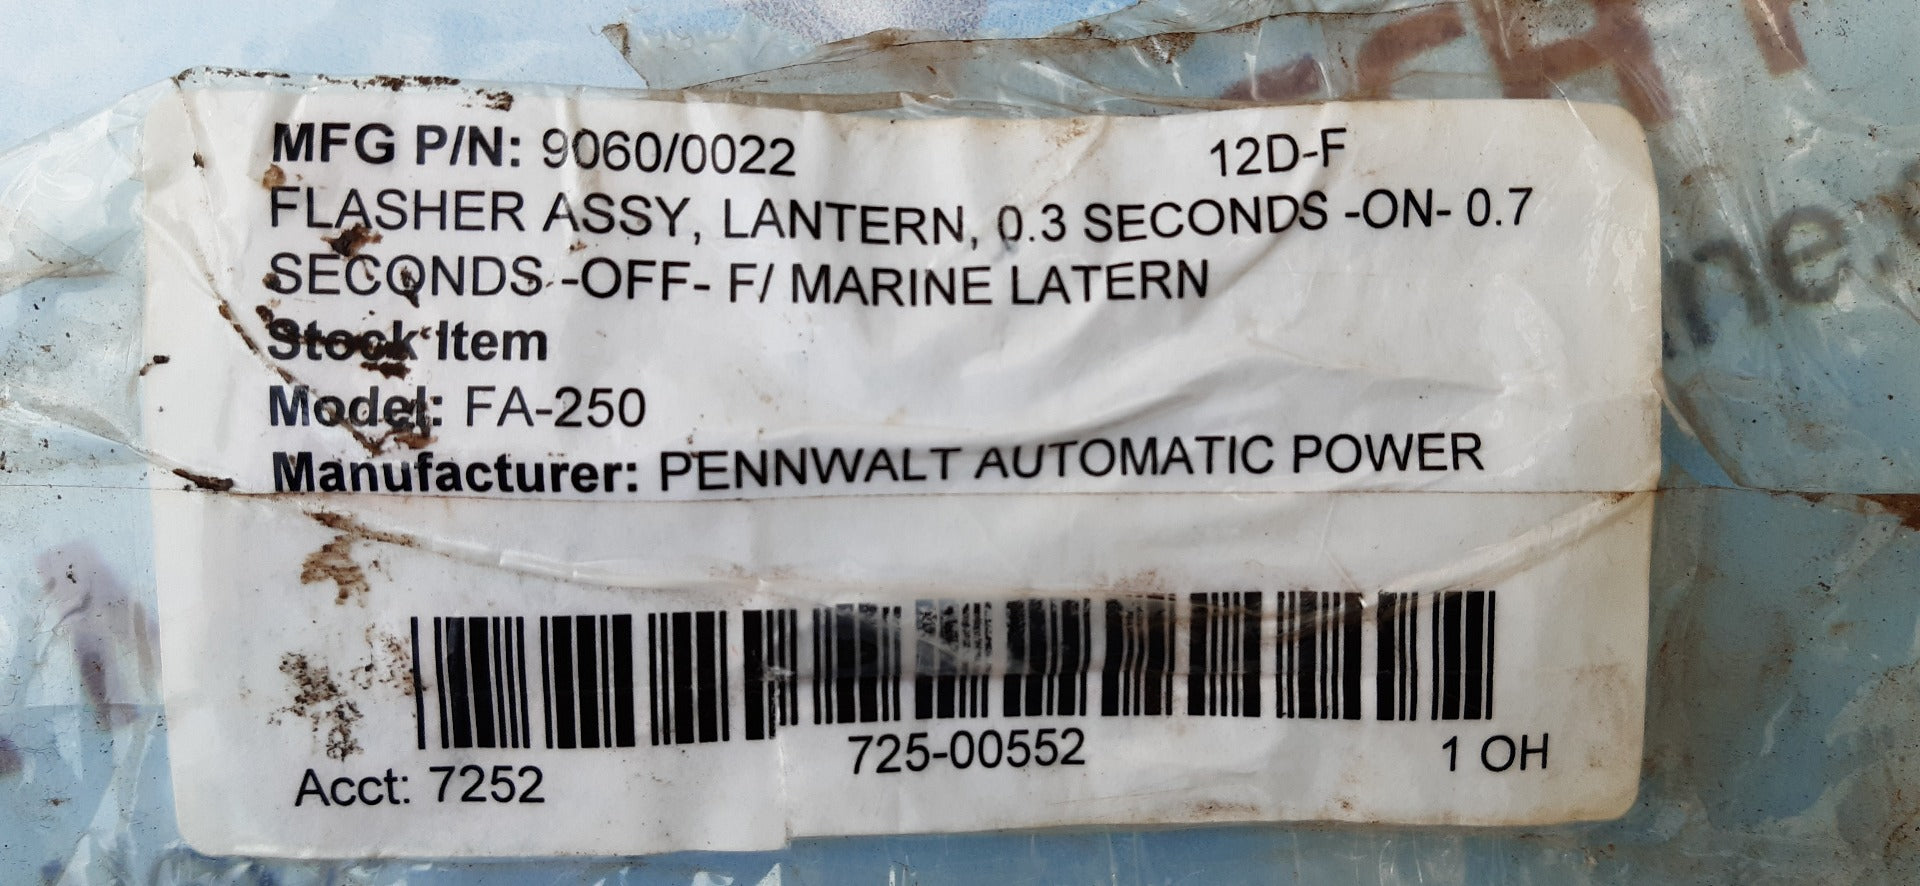 Automatic power apf-247-p pan master flasher 9060-0125/1001